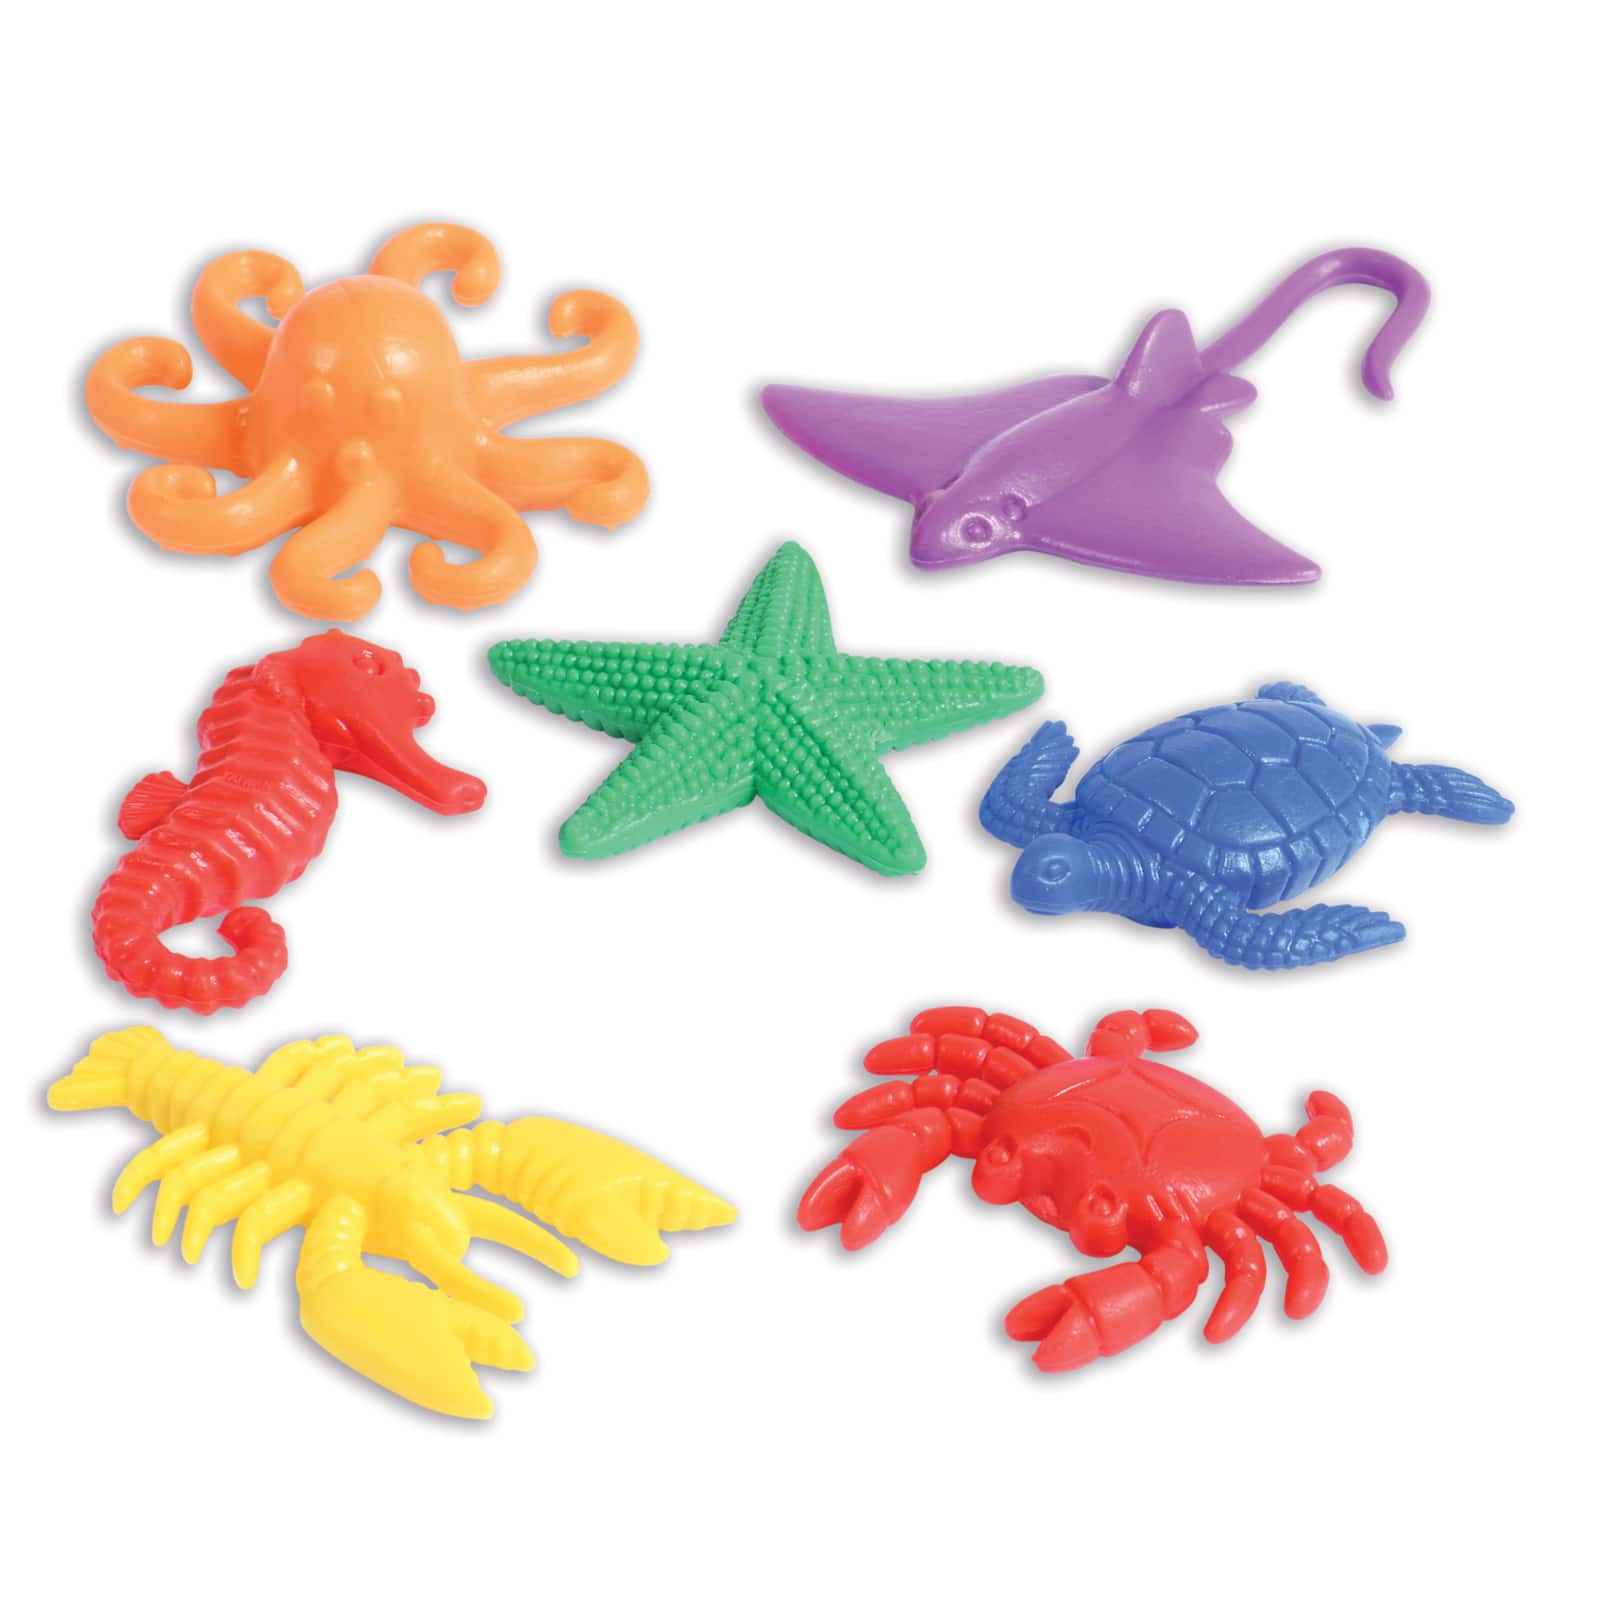 Purchase Edx Education® Aquatic Counters, 42ct. at Michaels.com